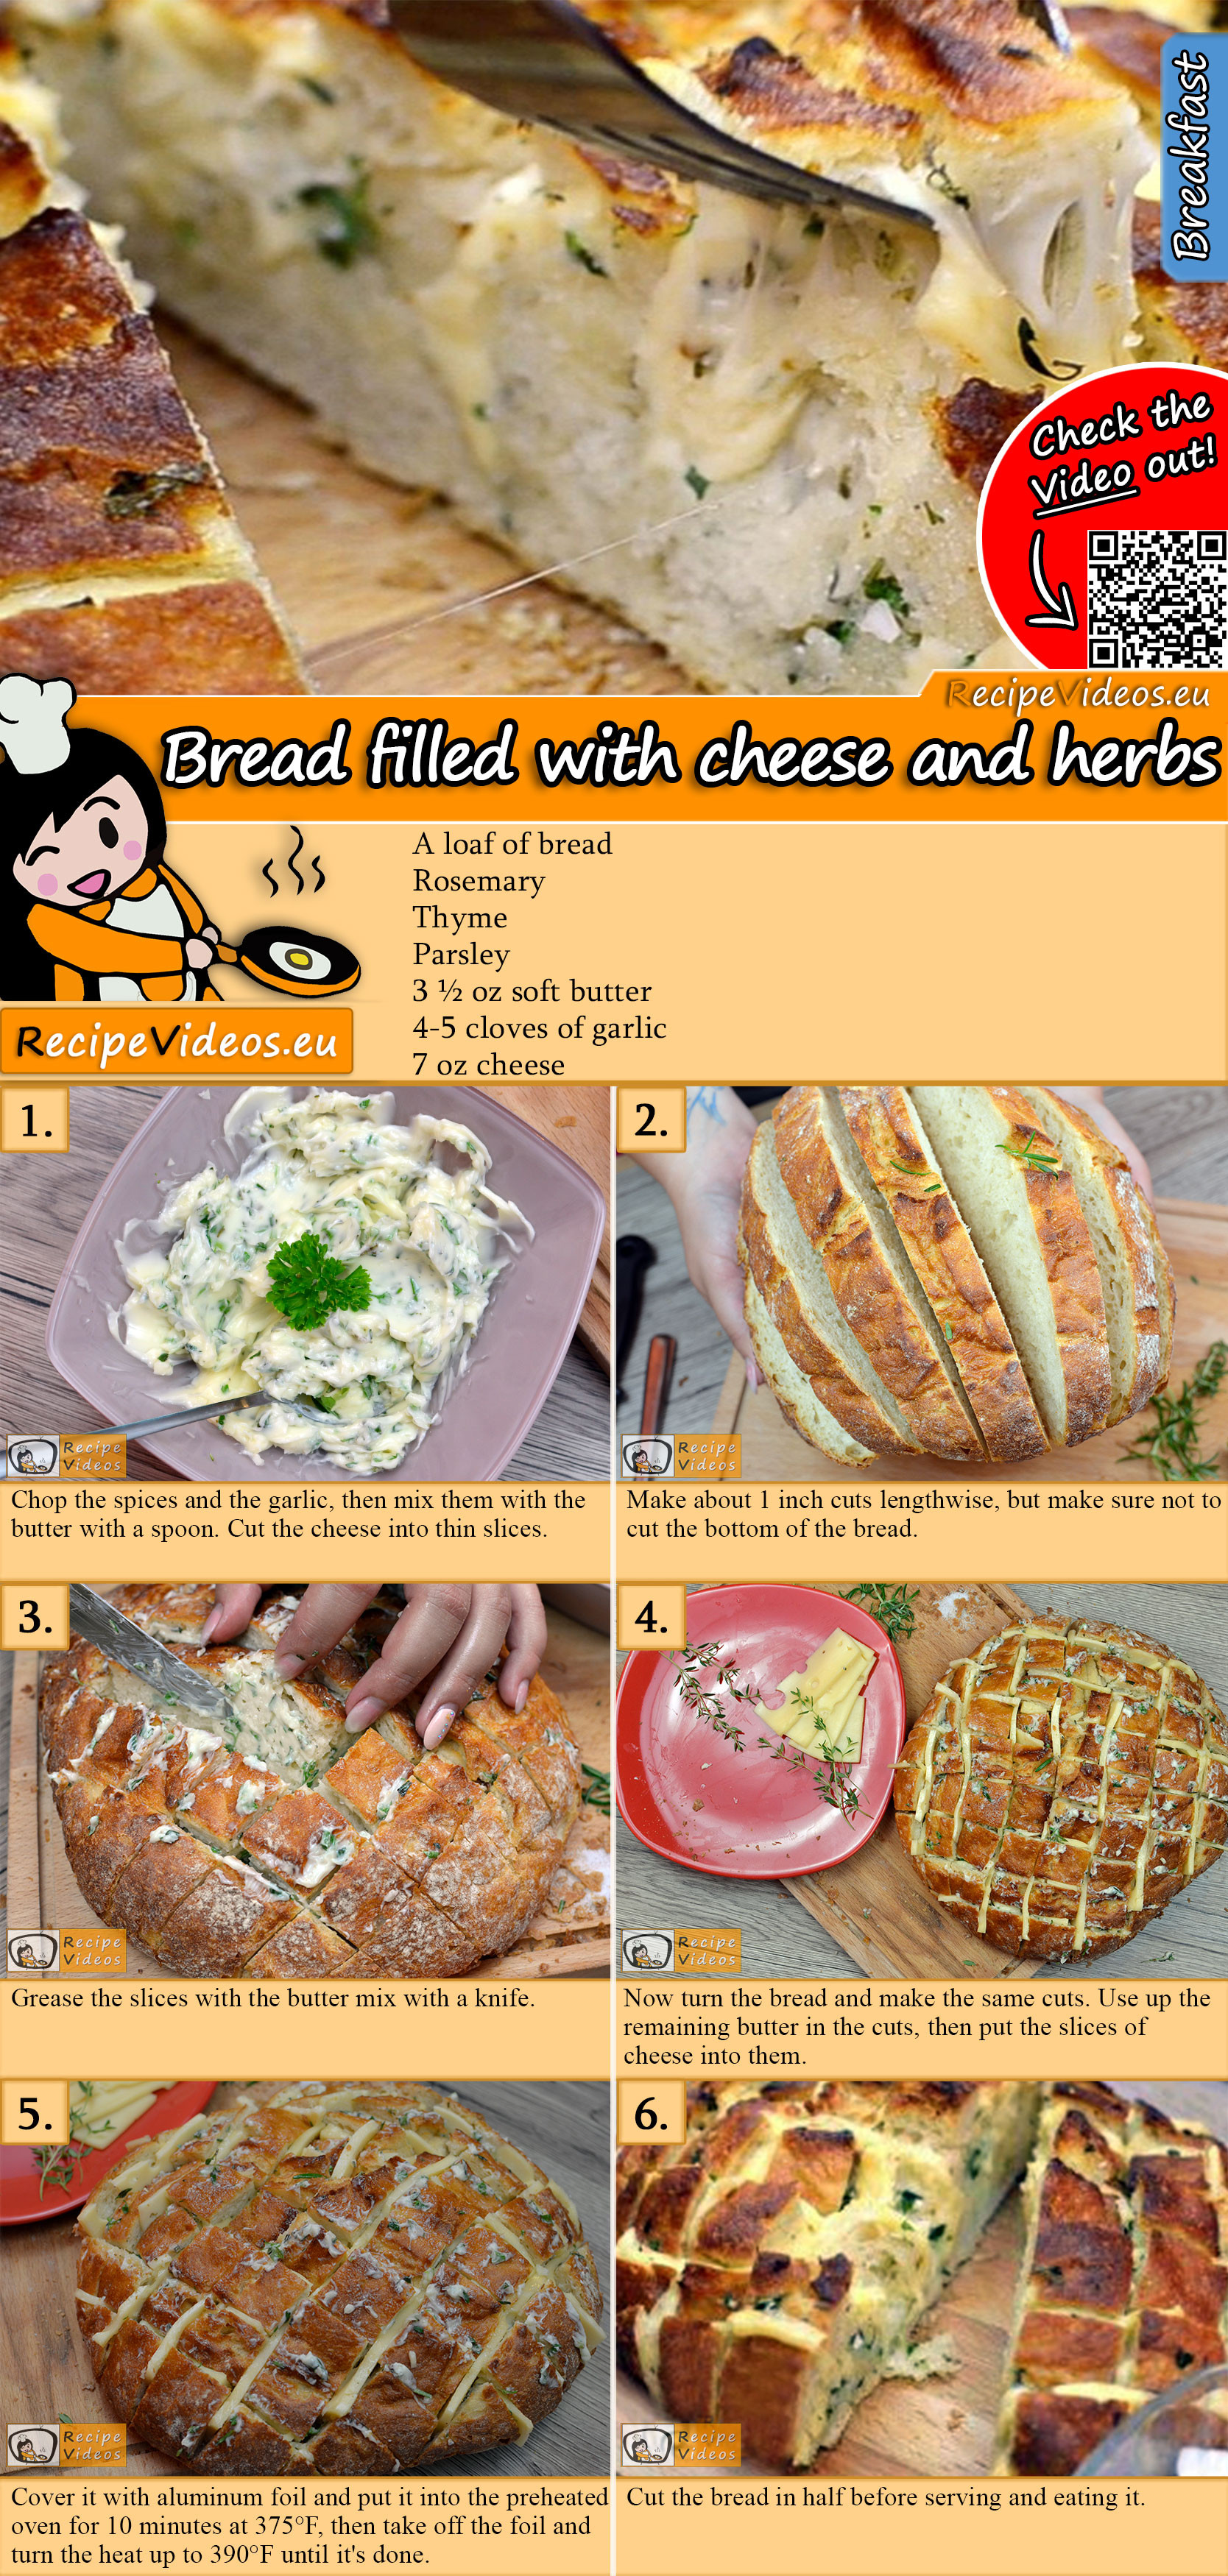 Bread filled with cheese and herbs recipe with video